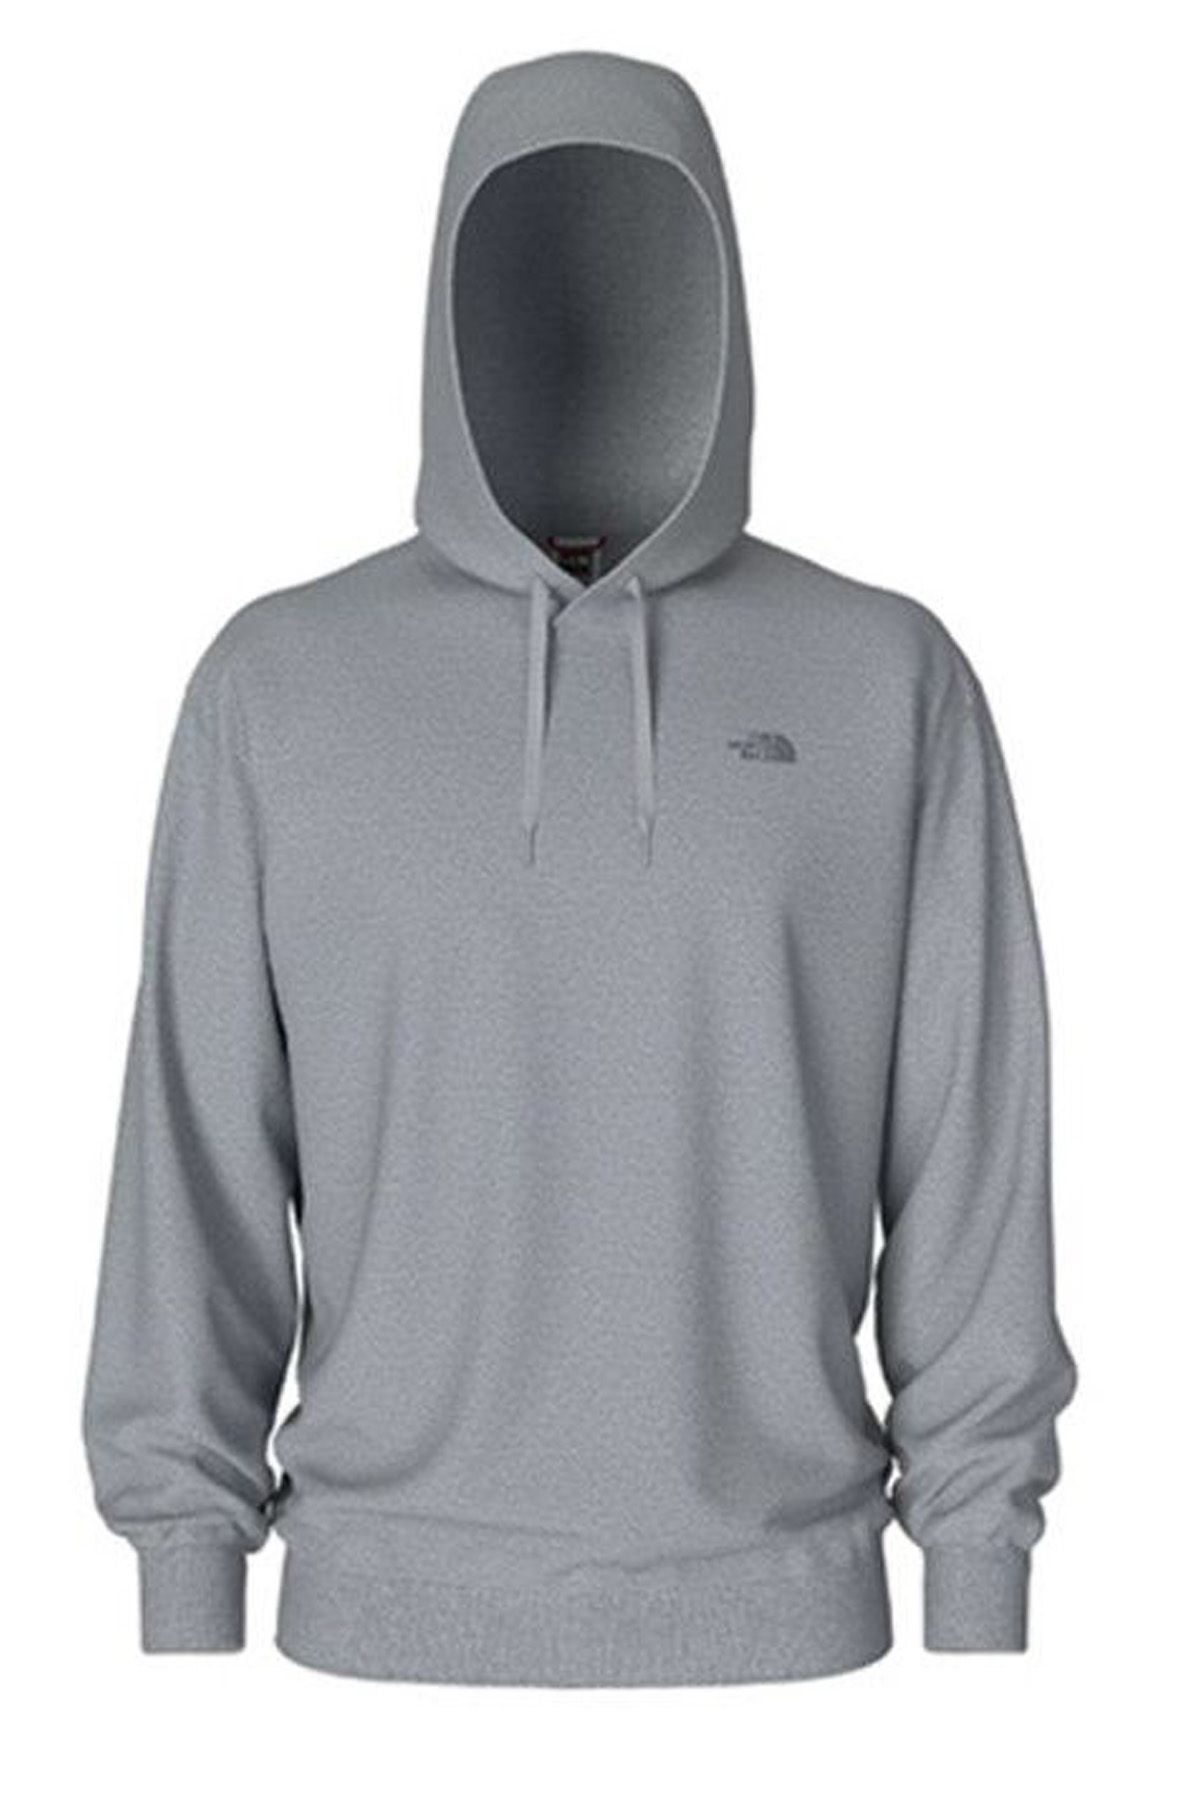 The North Face Oversized Hoodie Unisex SweatShirt - NF0A5IGC